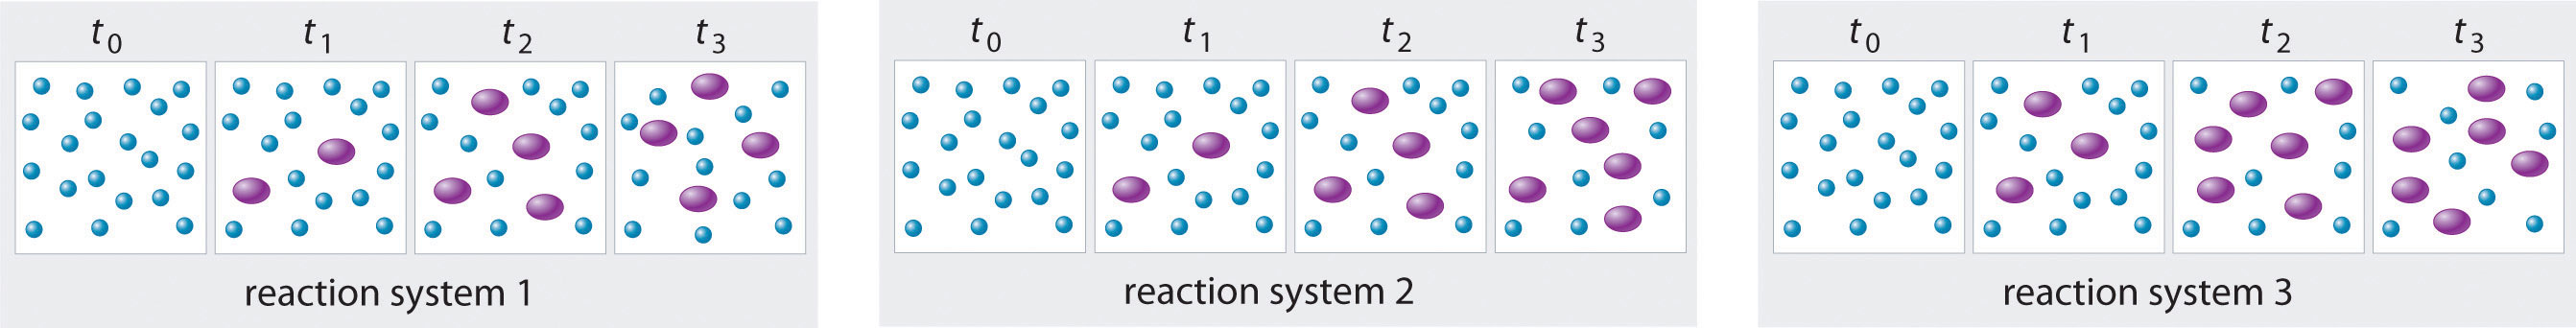 In reaction system 1 theree are four purple ovals  at t3. In reaction system 2 there are size purple ovals at t3. In reaction system systems there are six ovals at t2 and t3. 